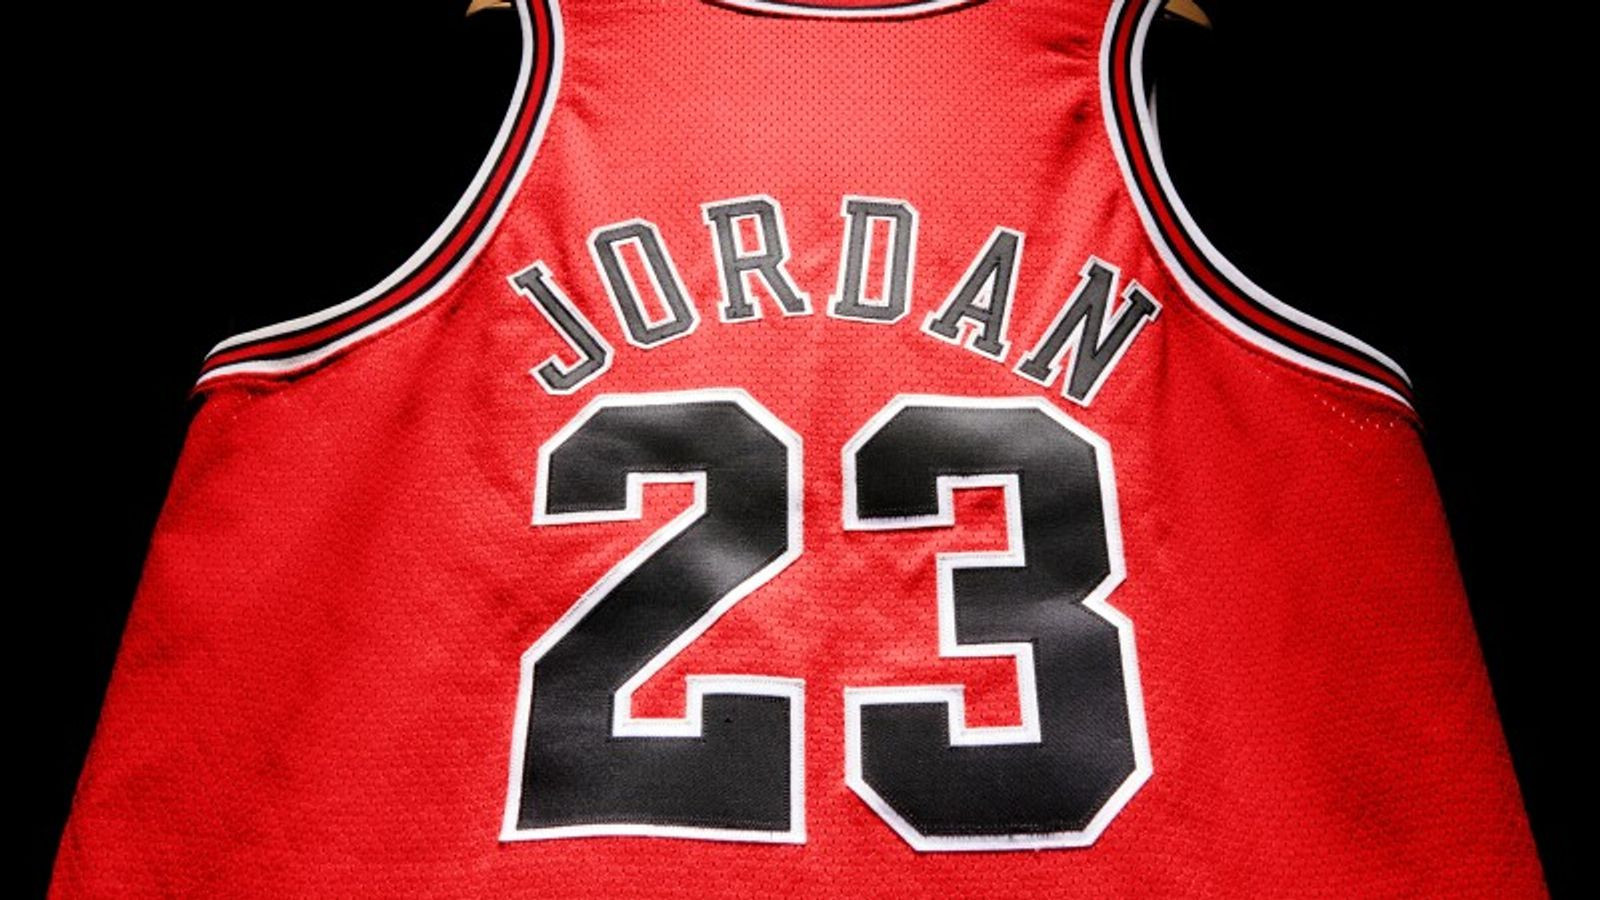 A Chicago Bulls jersey worn by Michael Jordan in the 1998 NBA finals has sold for a record $10.1 million at auction 